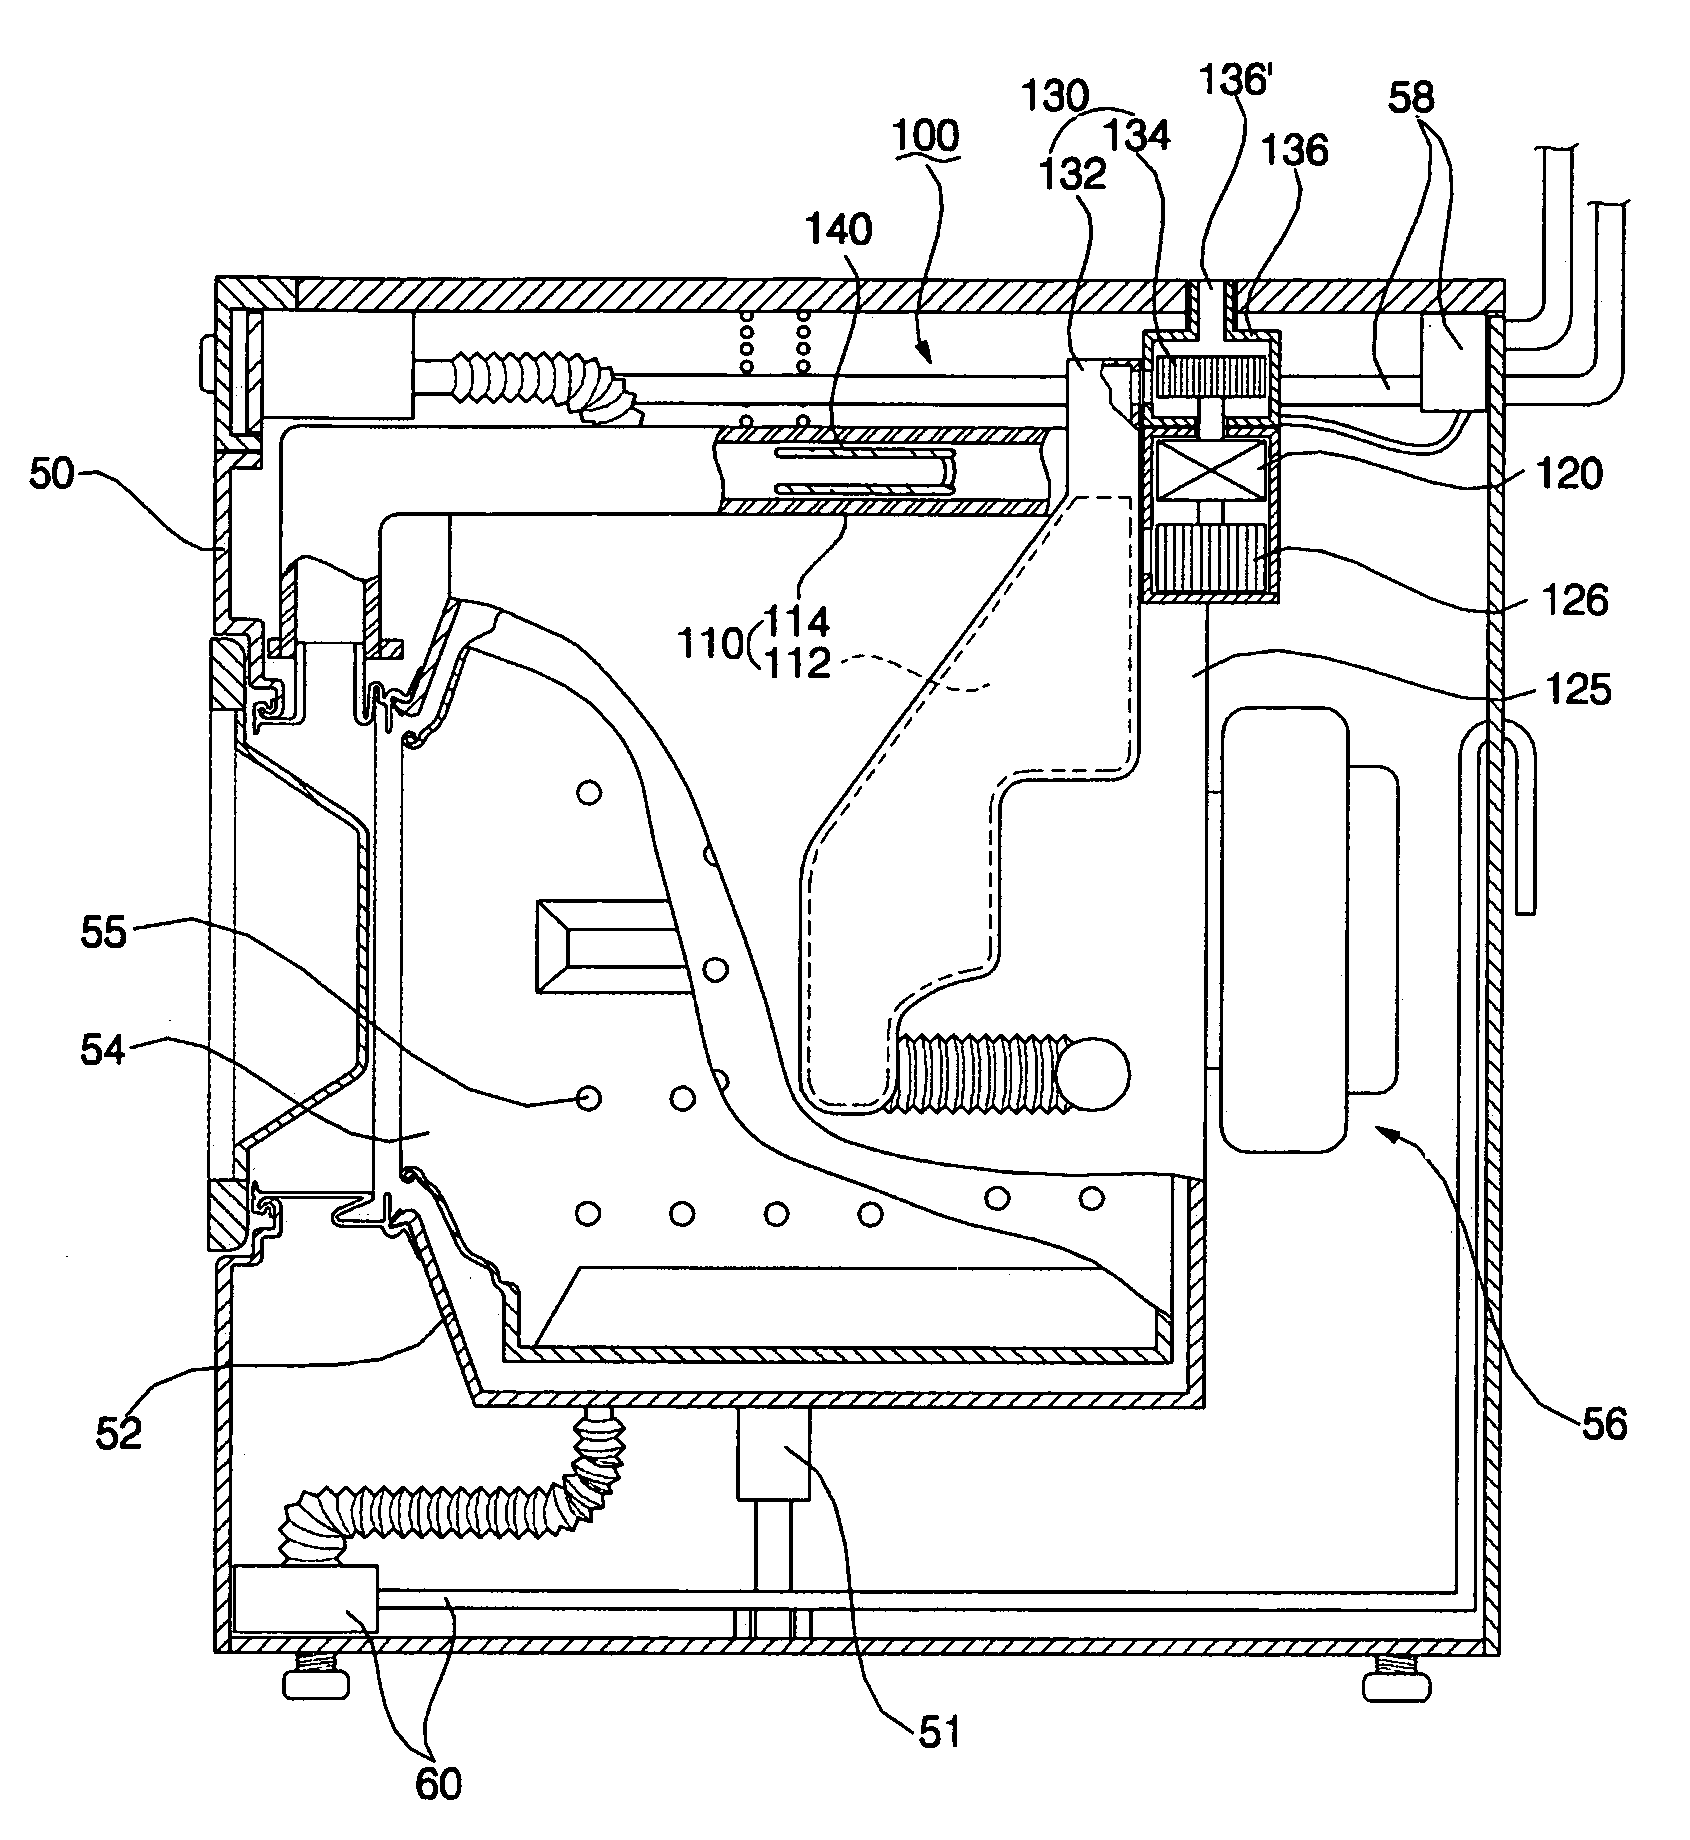 Drying unit for washing machines